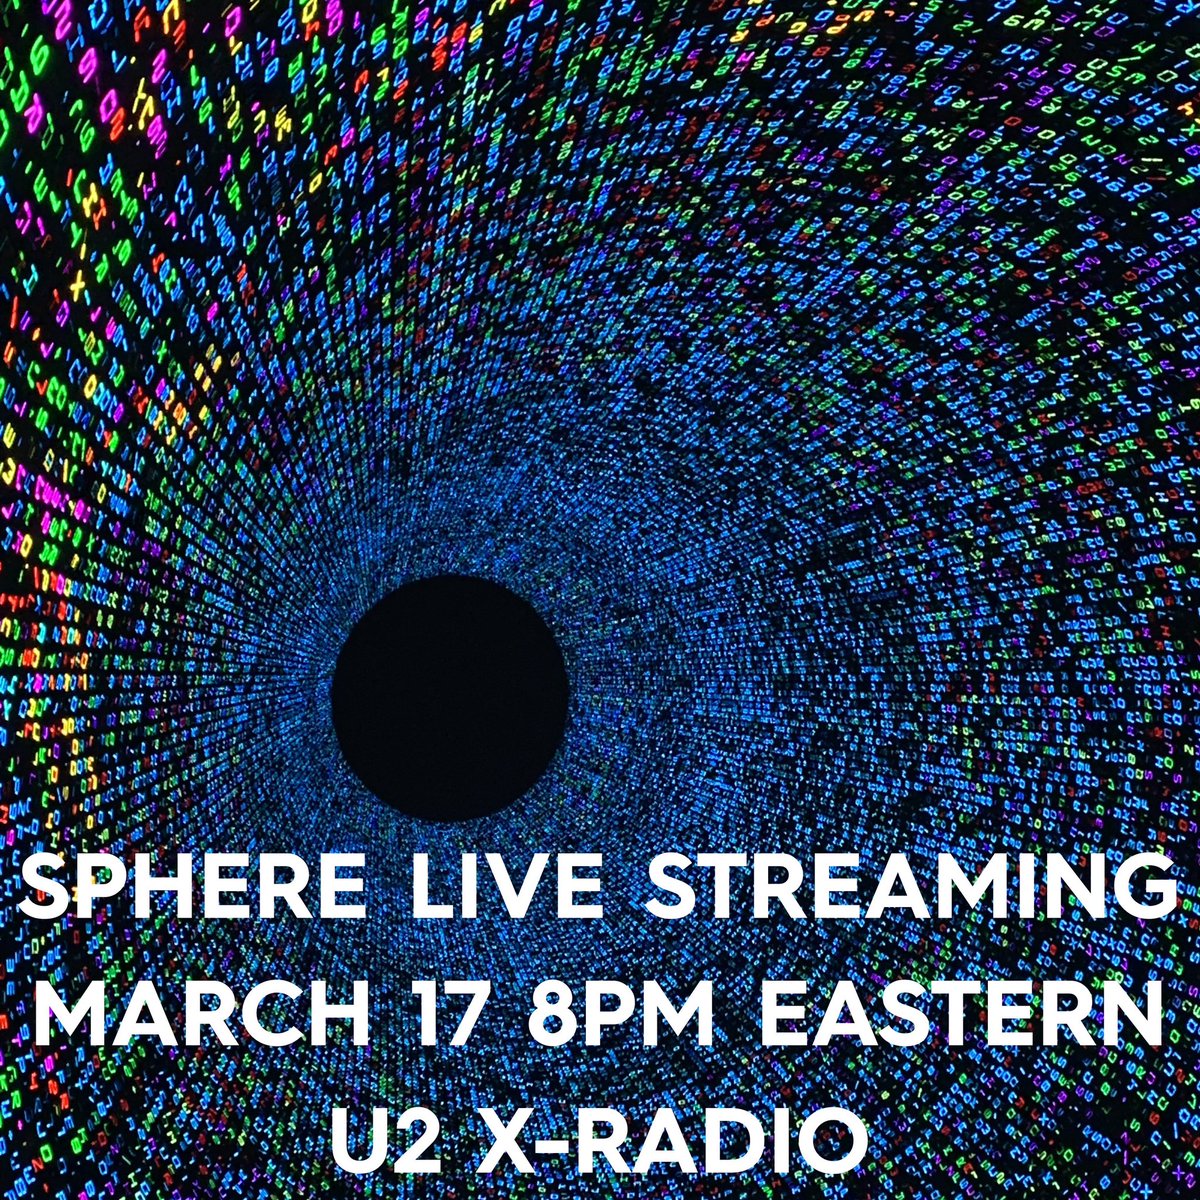 Multiple people reporting hearing ads yesterday and today on non-U2XRadio stations on SiriusXM that there will be a special about #U2UVSphere streaming on St. Patrick's Day at 8pm Eastern. Show will air on U2XRadio.